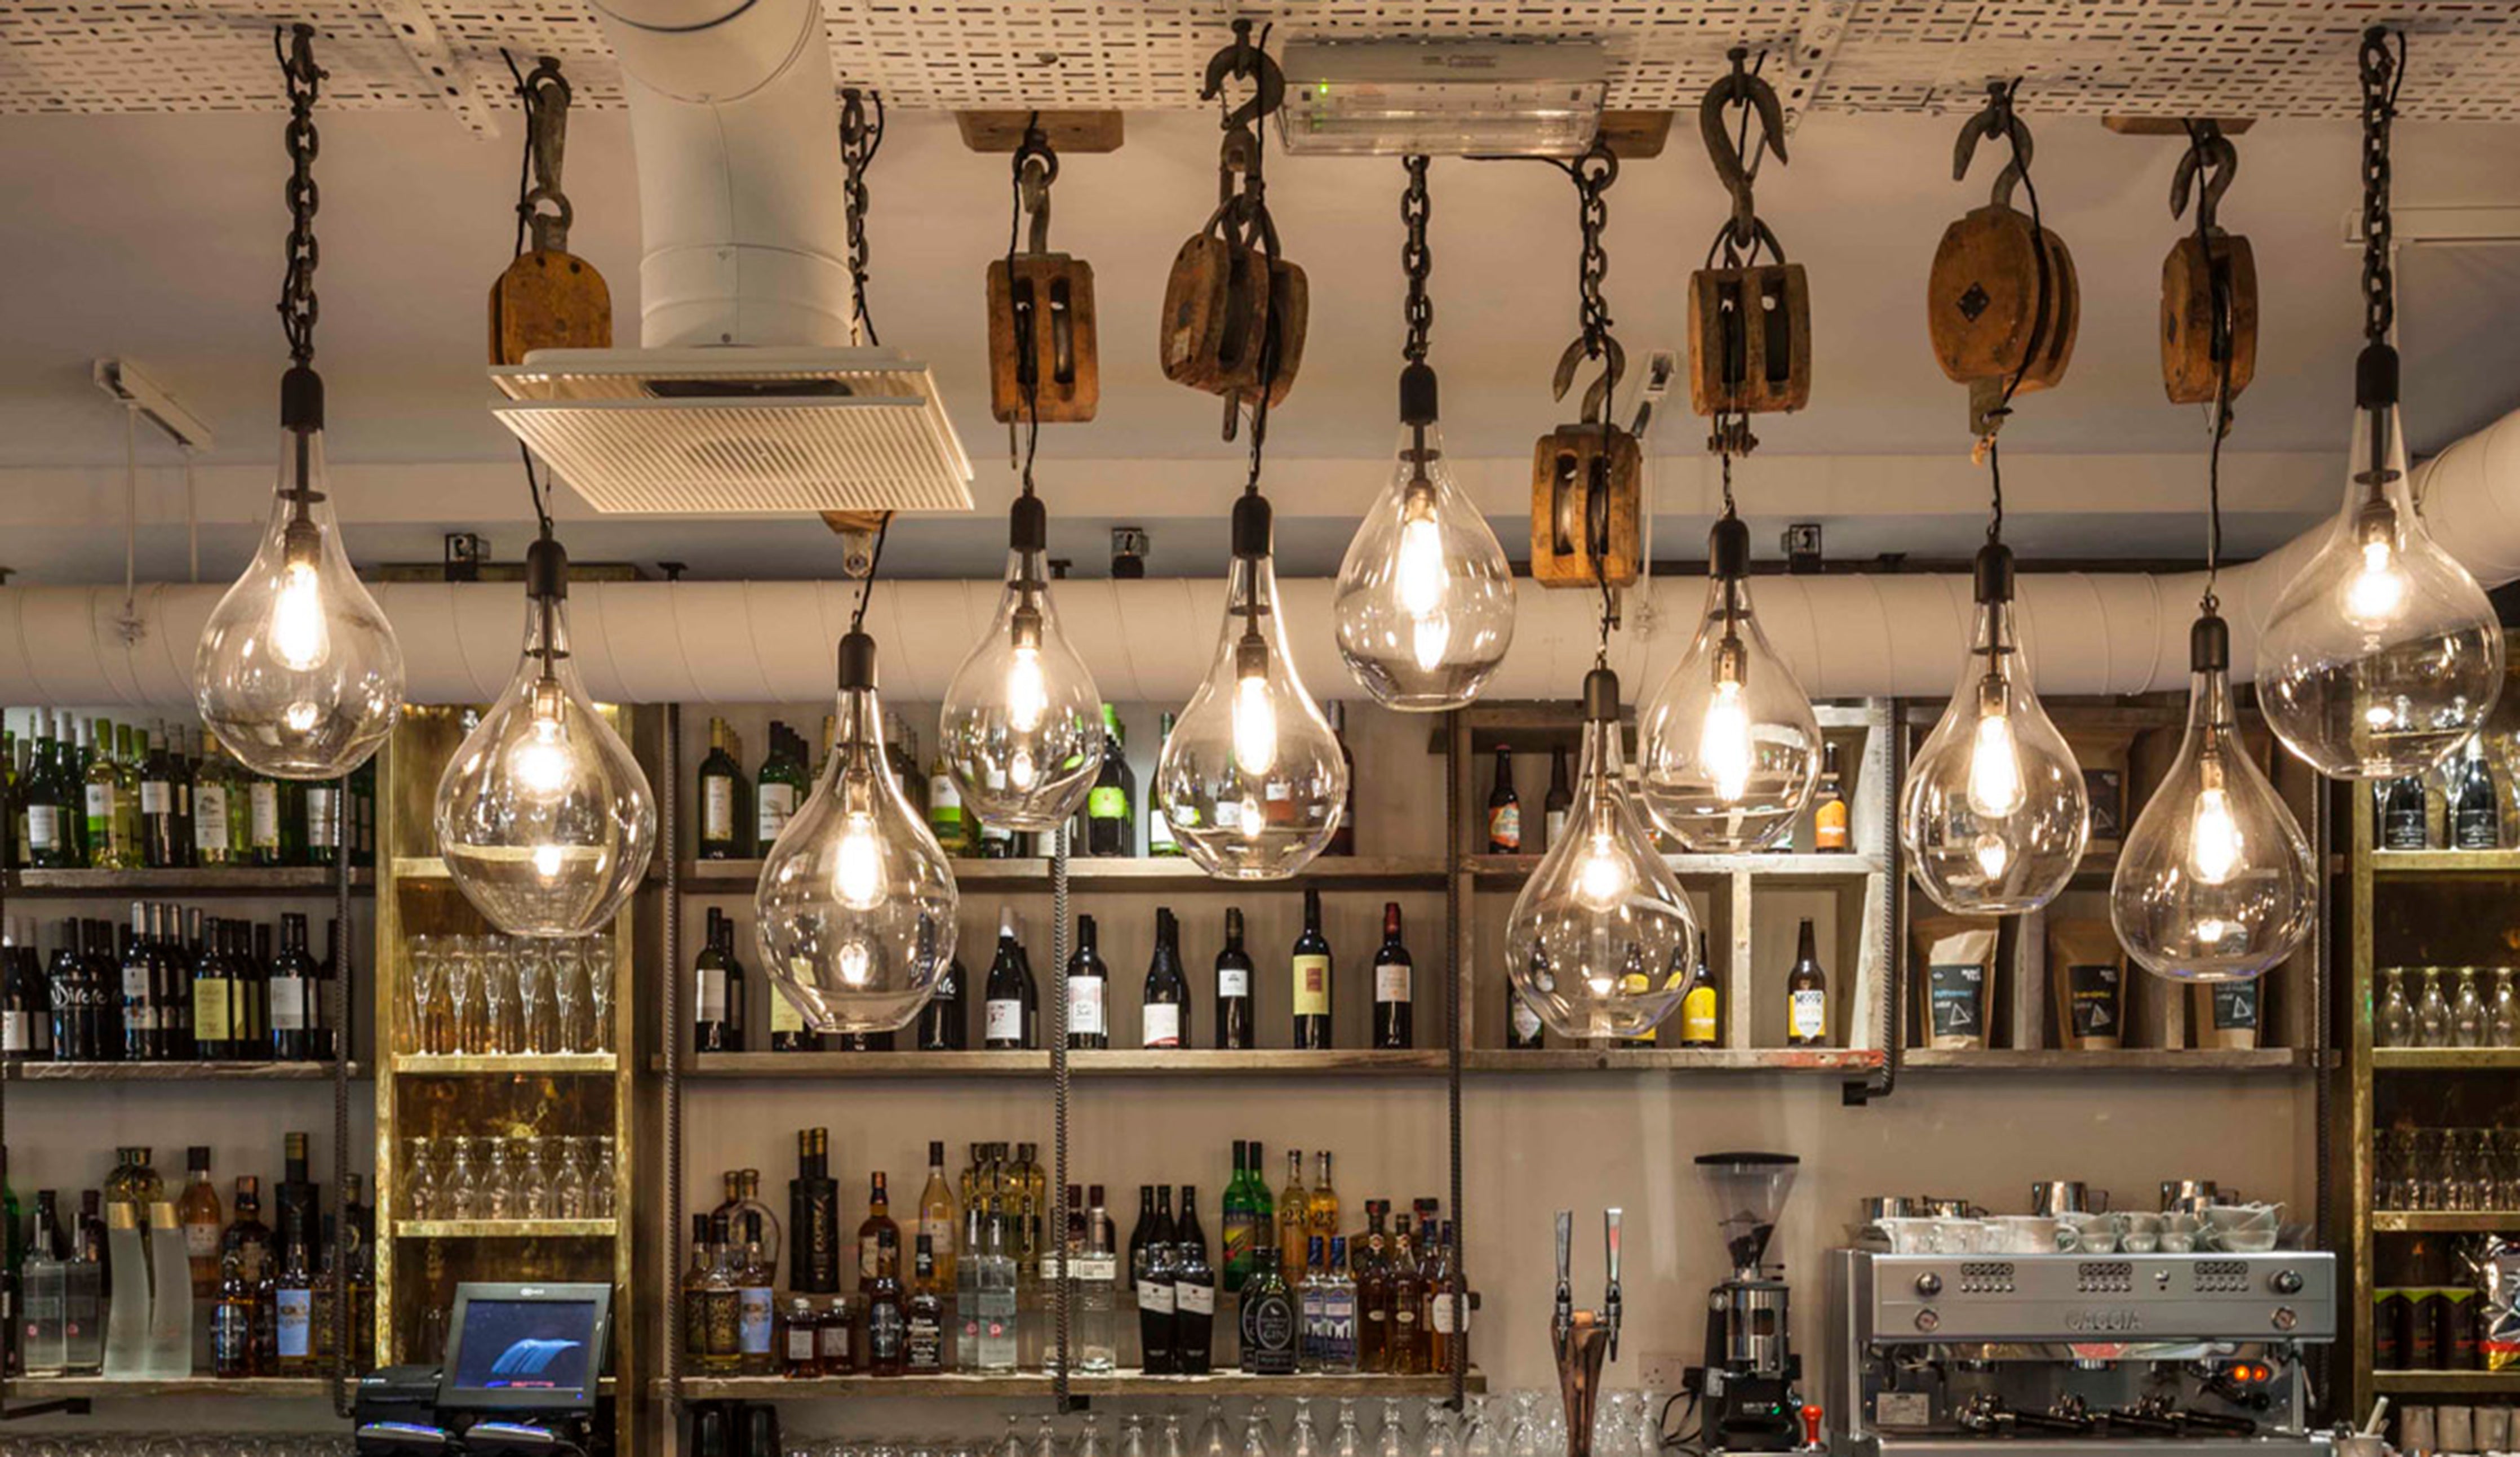 Bespoke glass pendants by Rothschild &amp; Bickers hanging over bar at Whyte &amp; Brown London